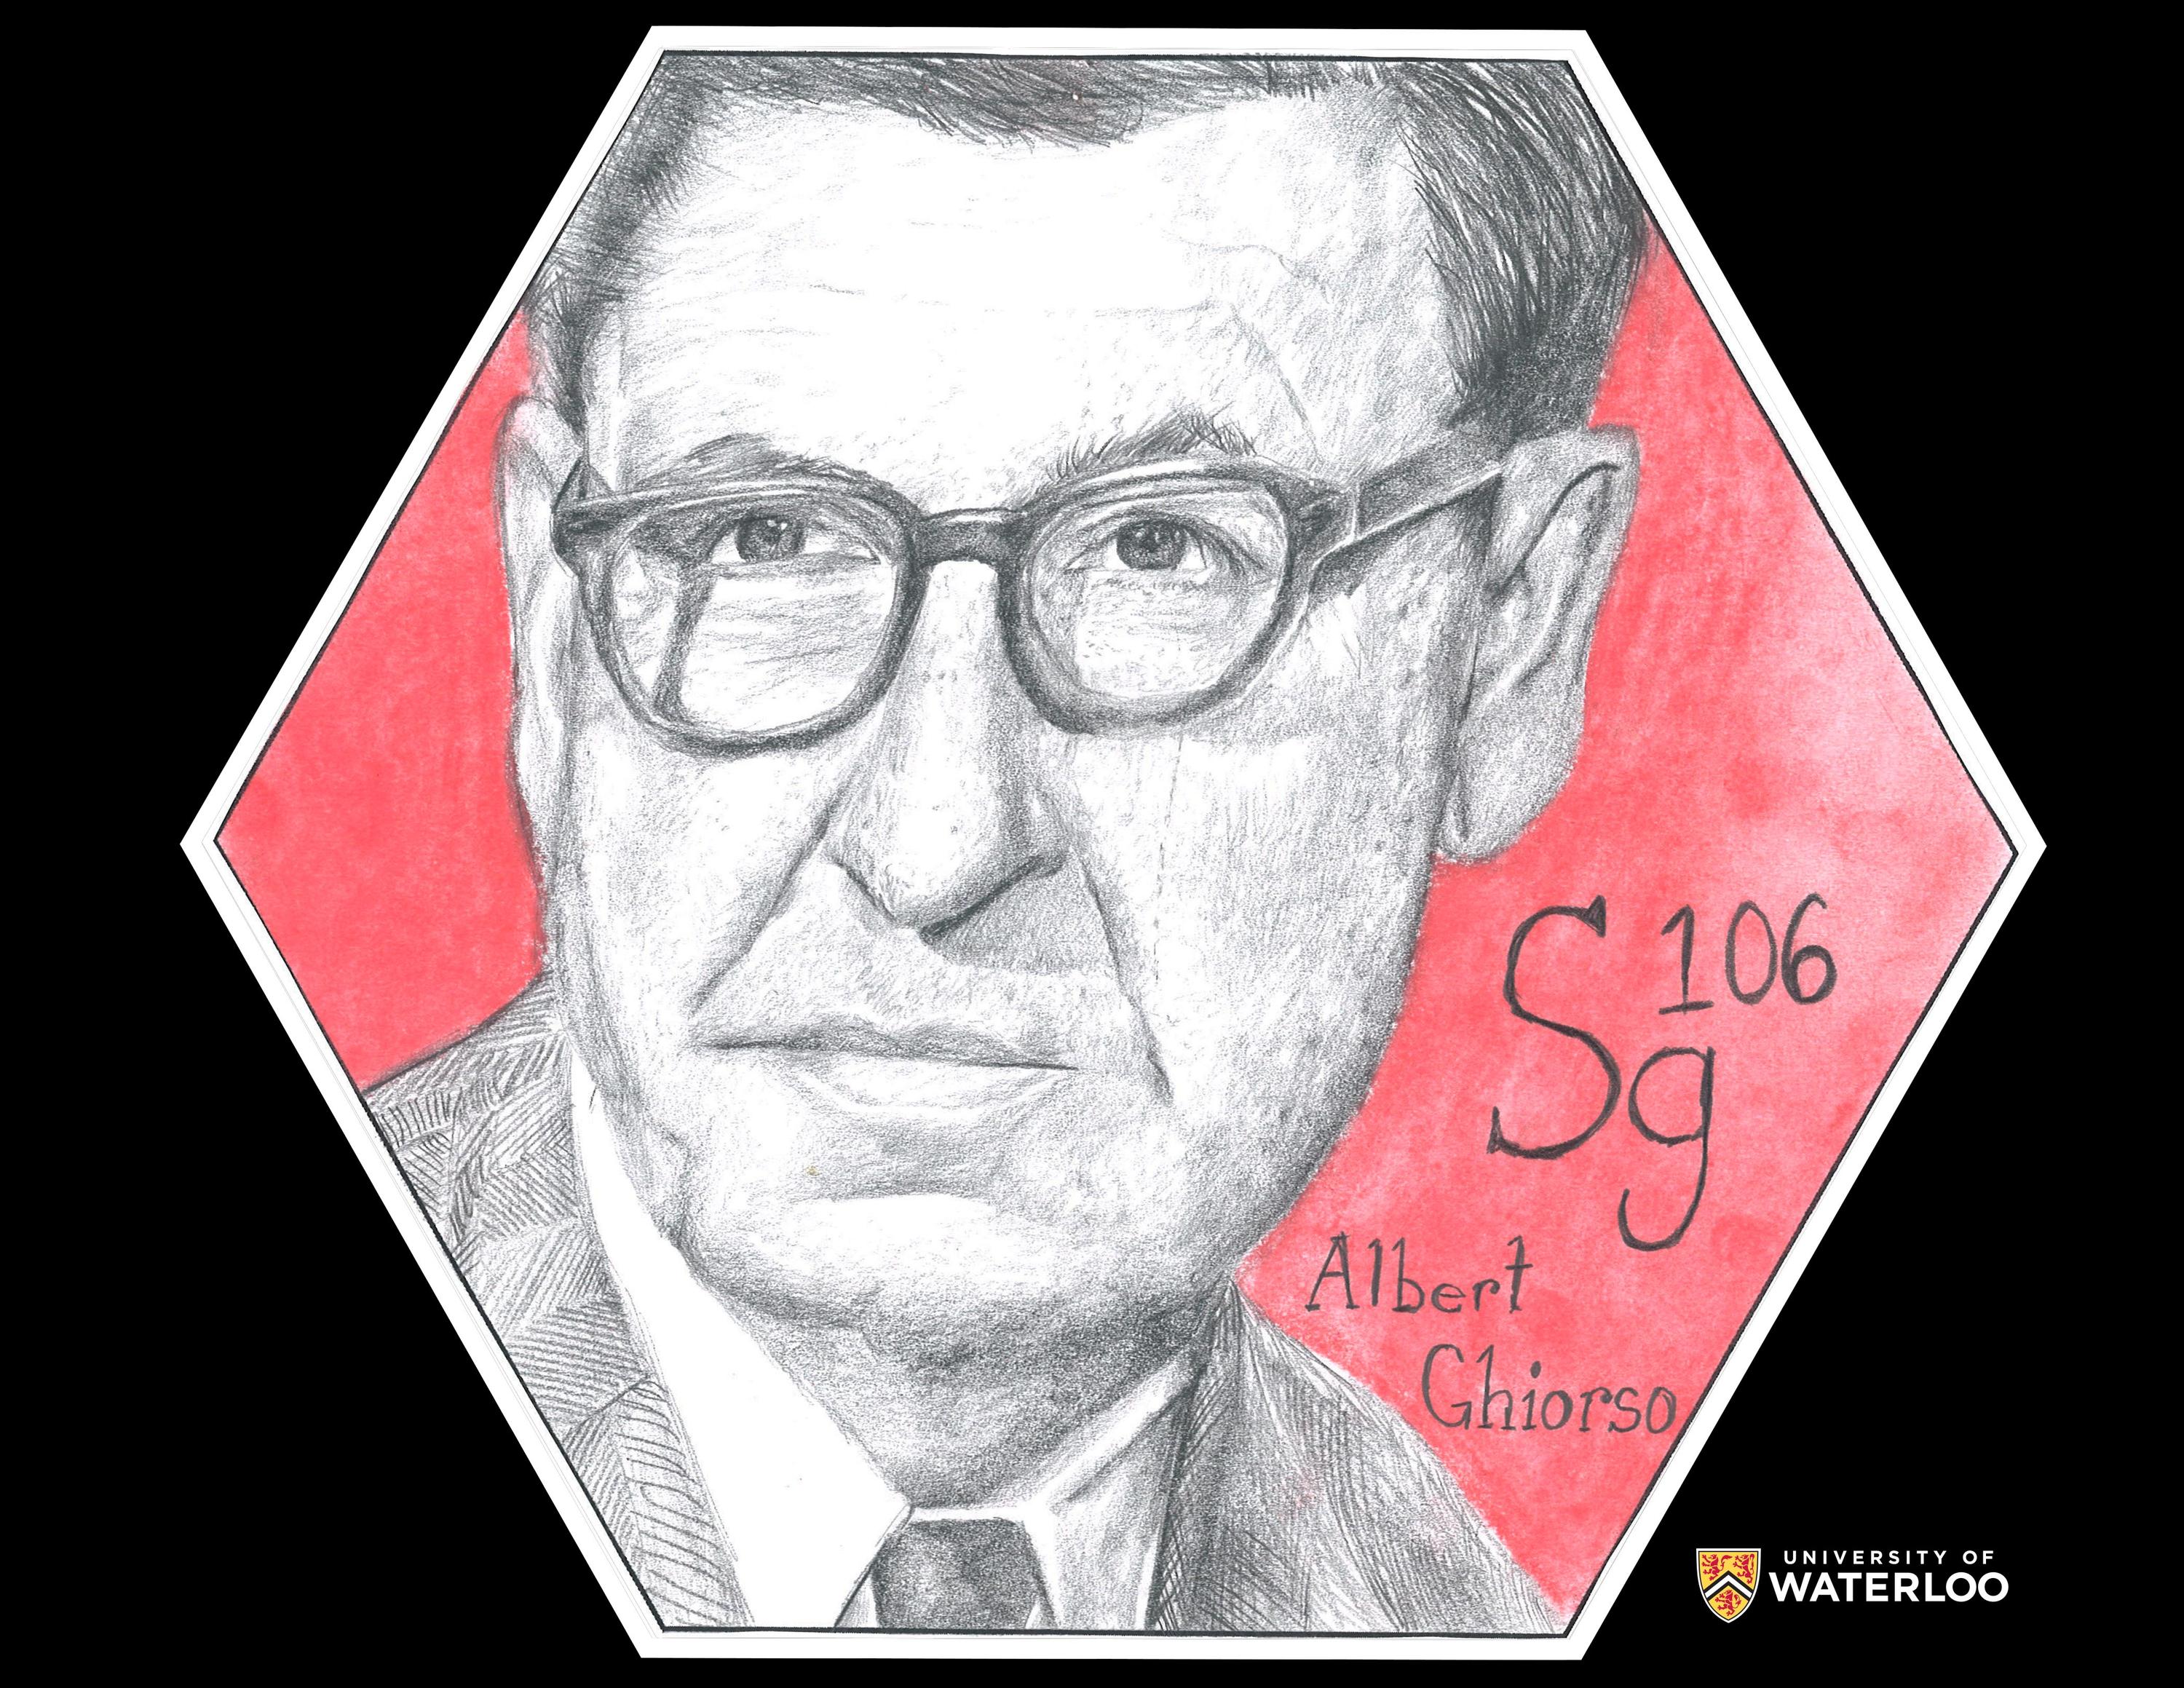 Pencil on paper. Black and white portrait of Albert Ghiorso on a red background. Chemical symbol “Sg” and atomic number “106” also appear.